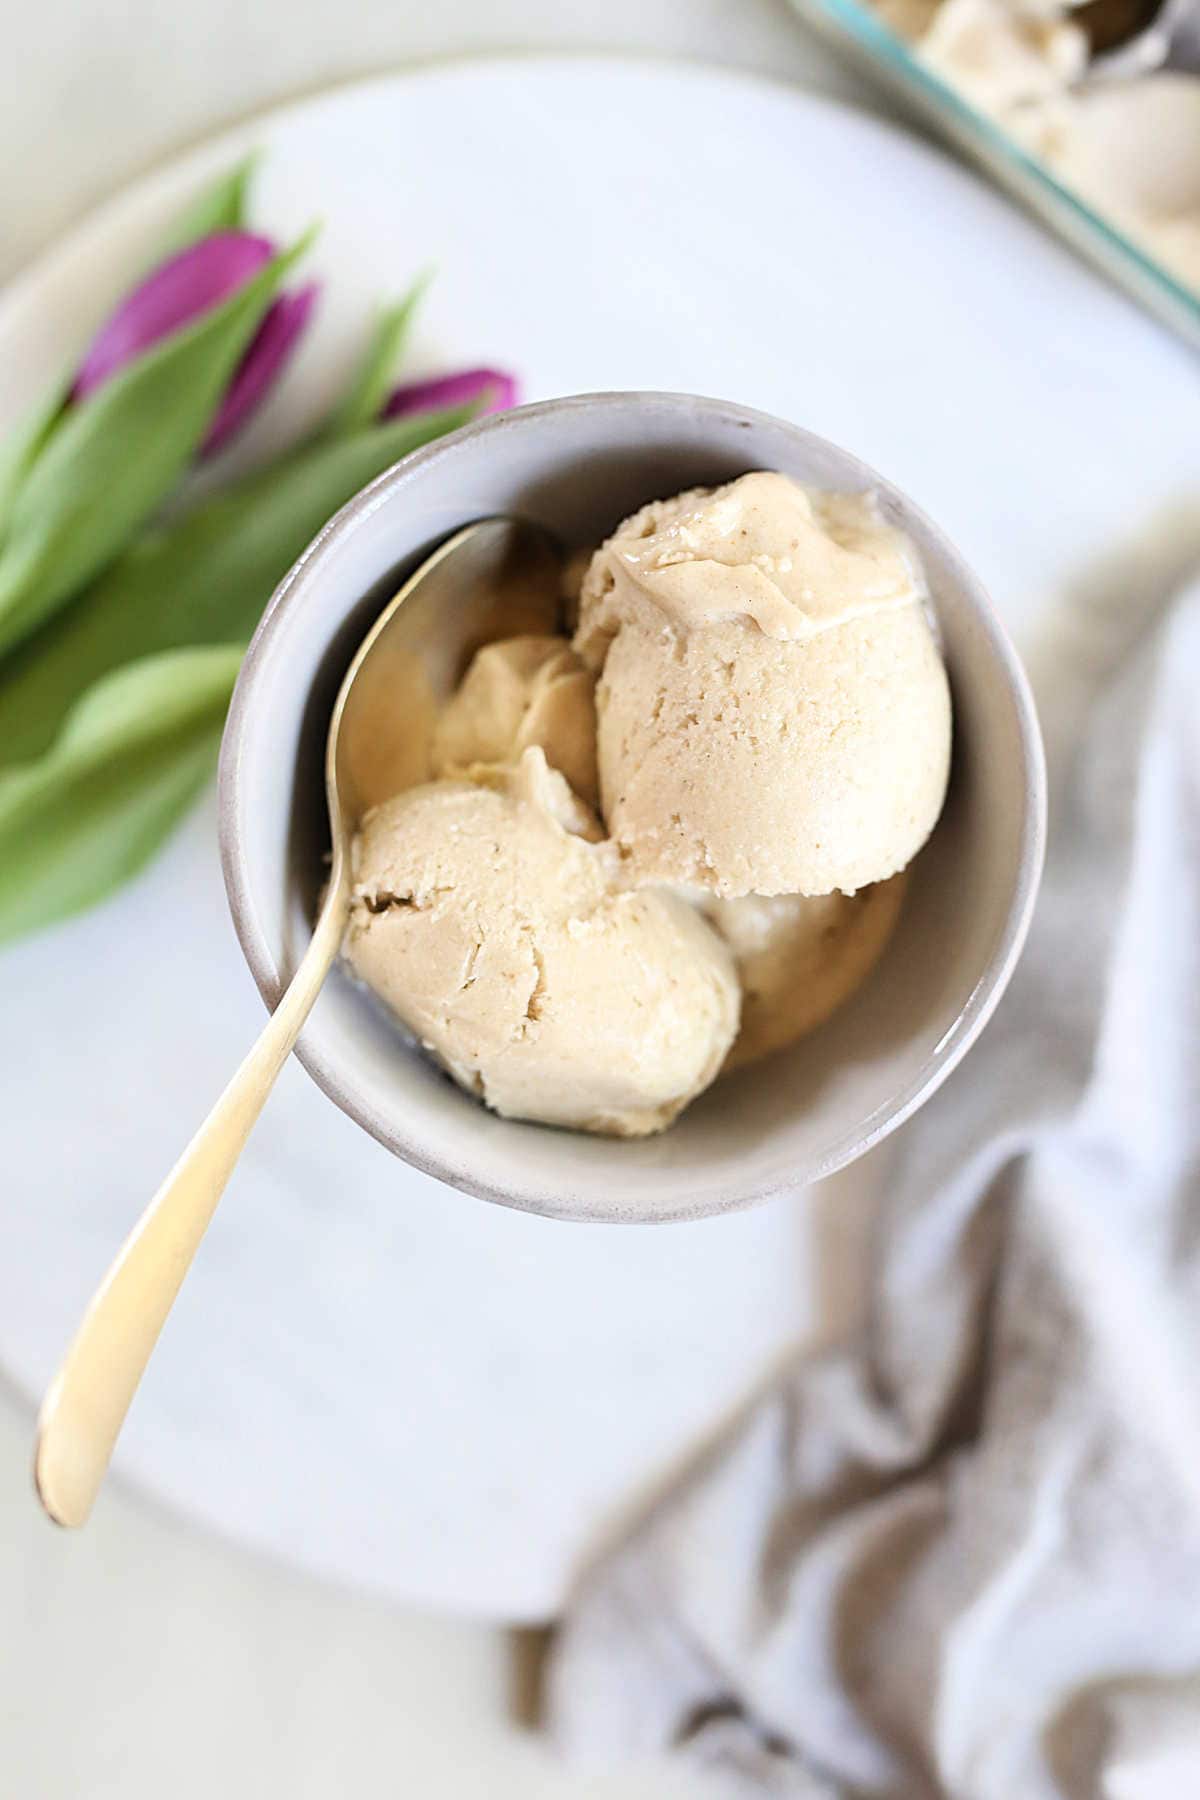 Healthy Banana Ice Cream Recipe in a Bowl with a Gold Spoon